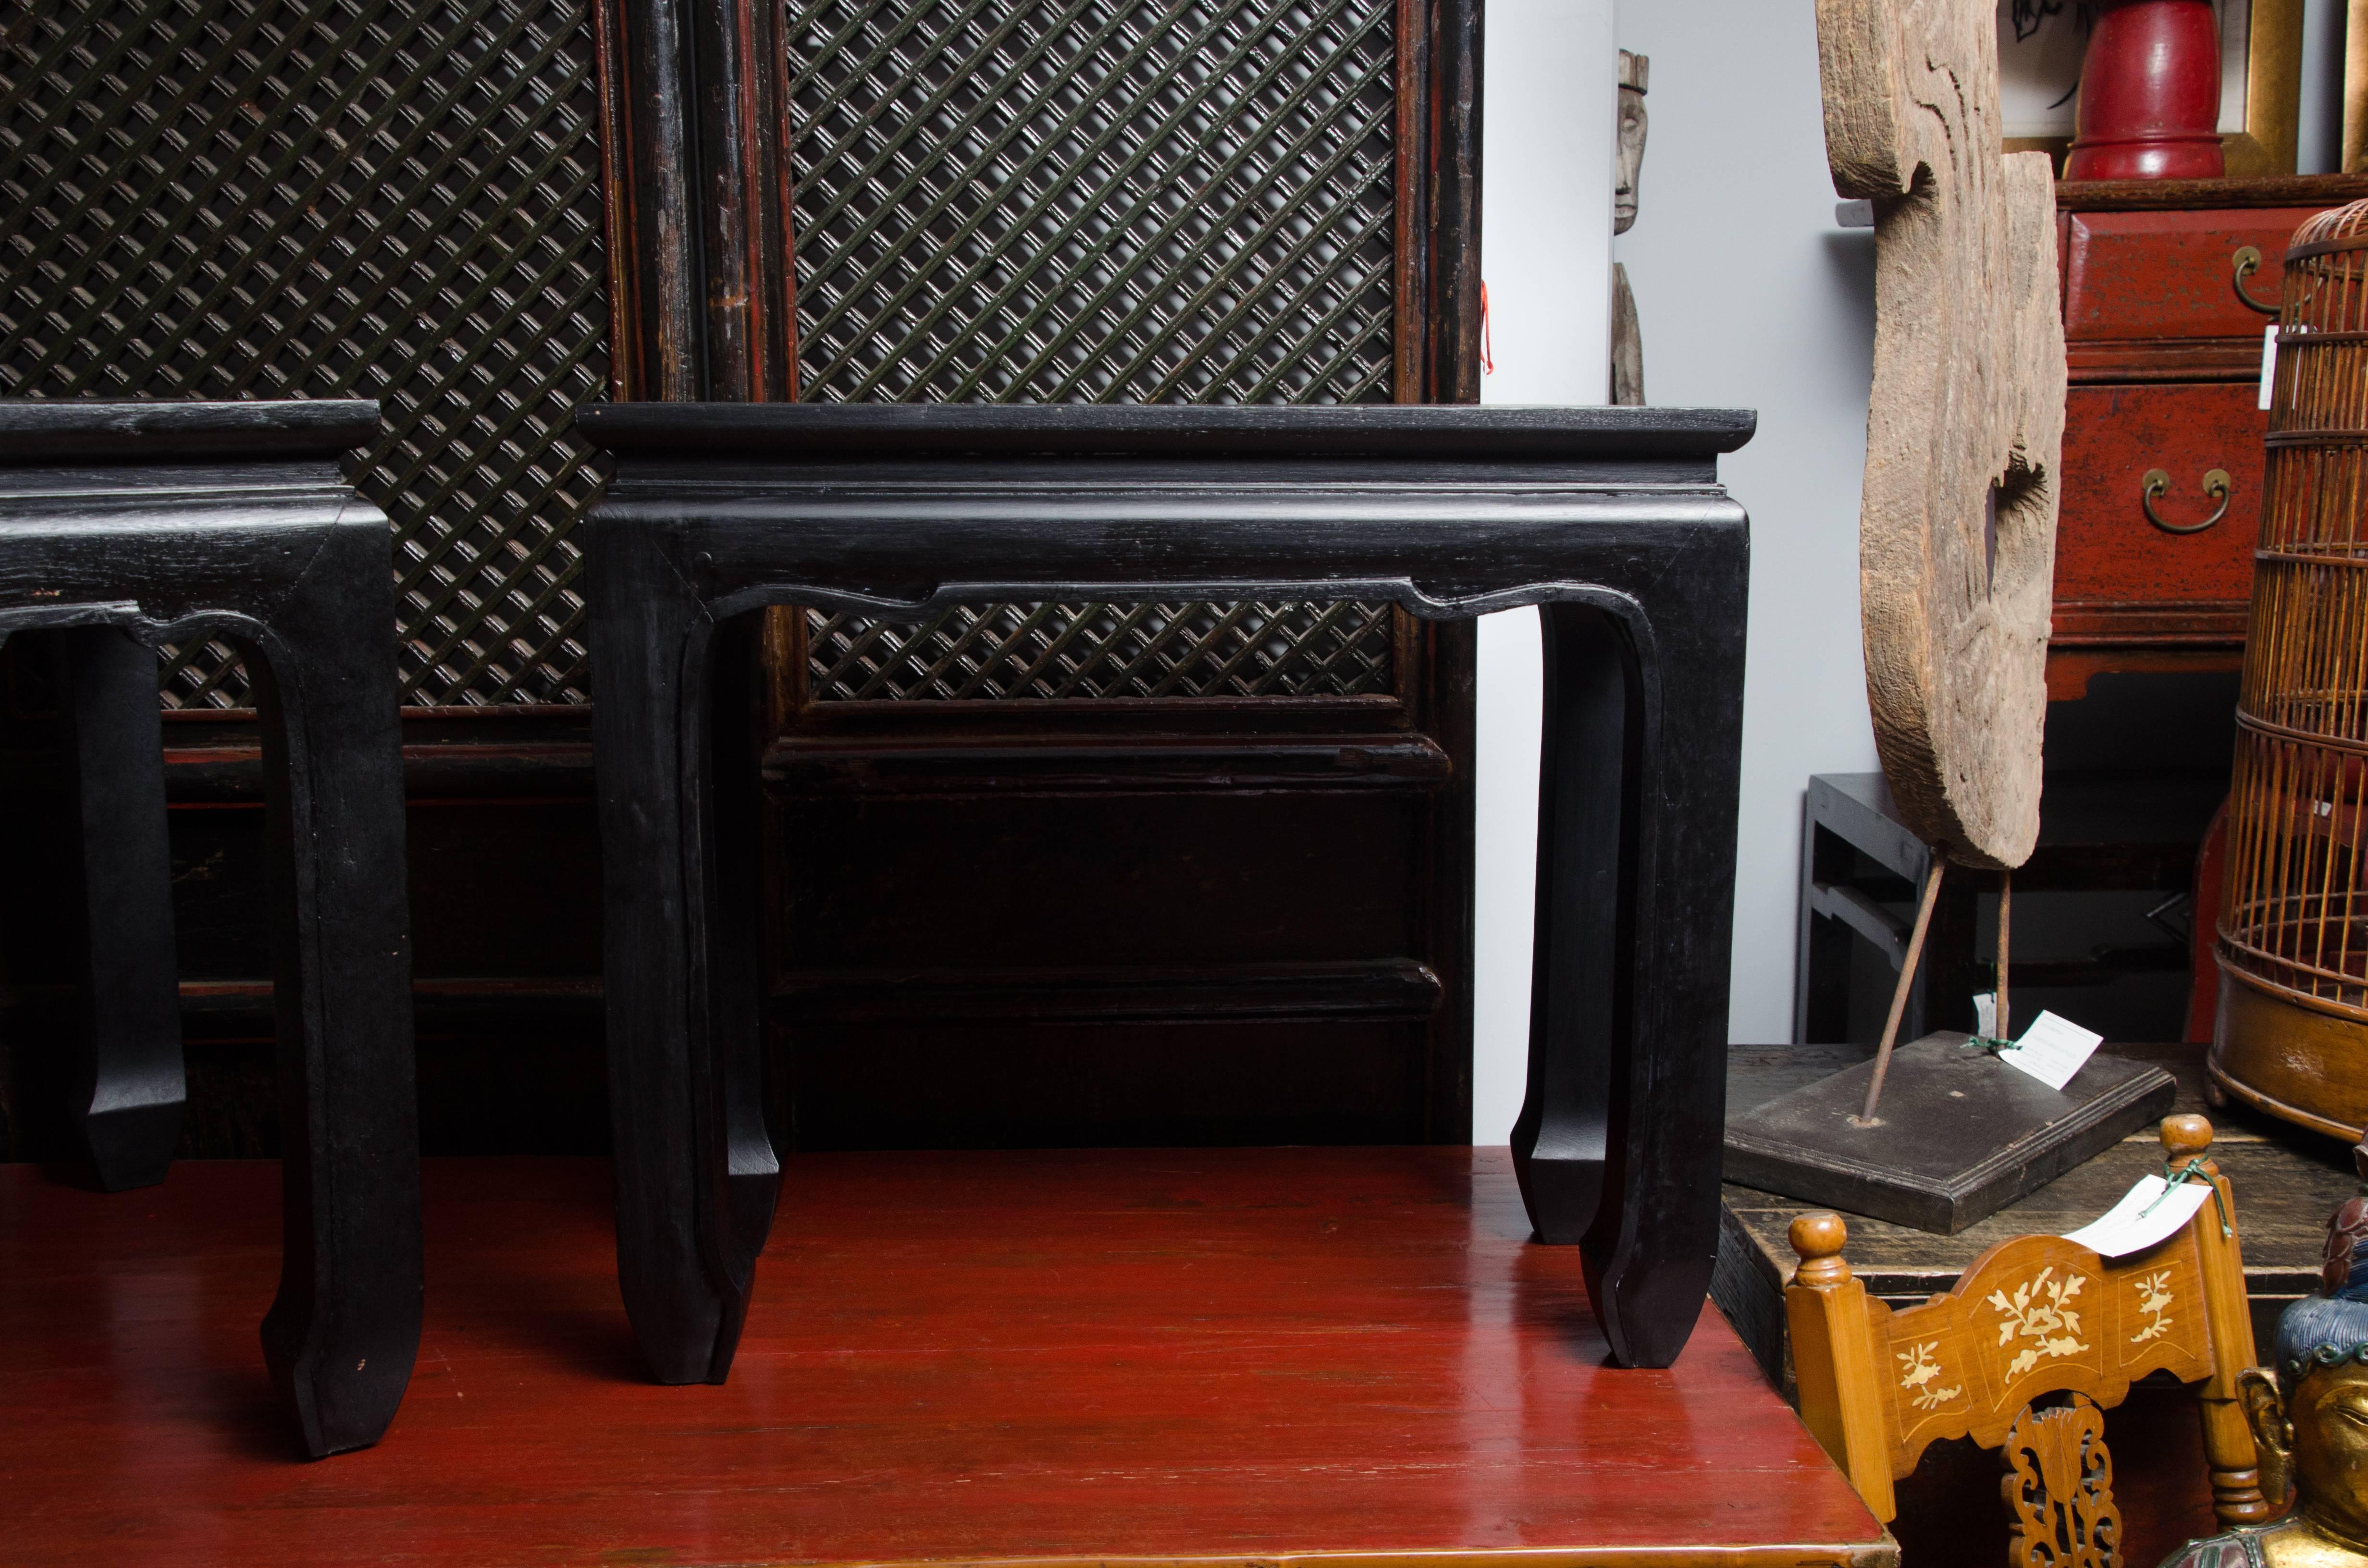 Turn of the century Qing dynasty black lacquered southern elm bench with chow leg (two available, priced and sold separately).